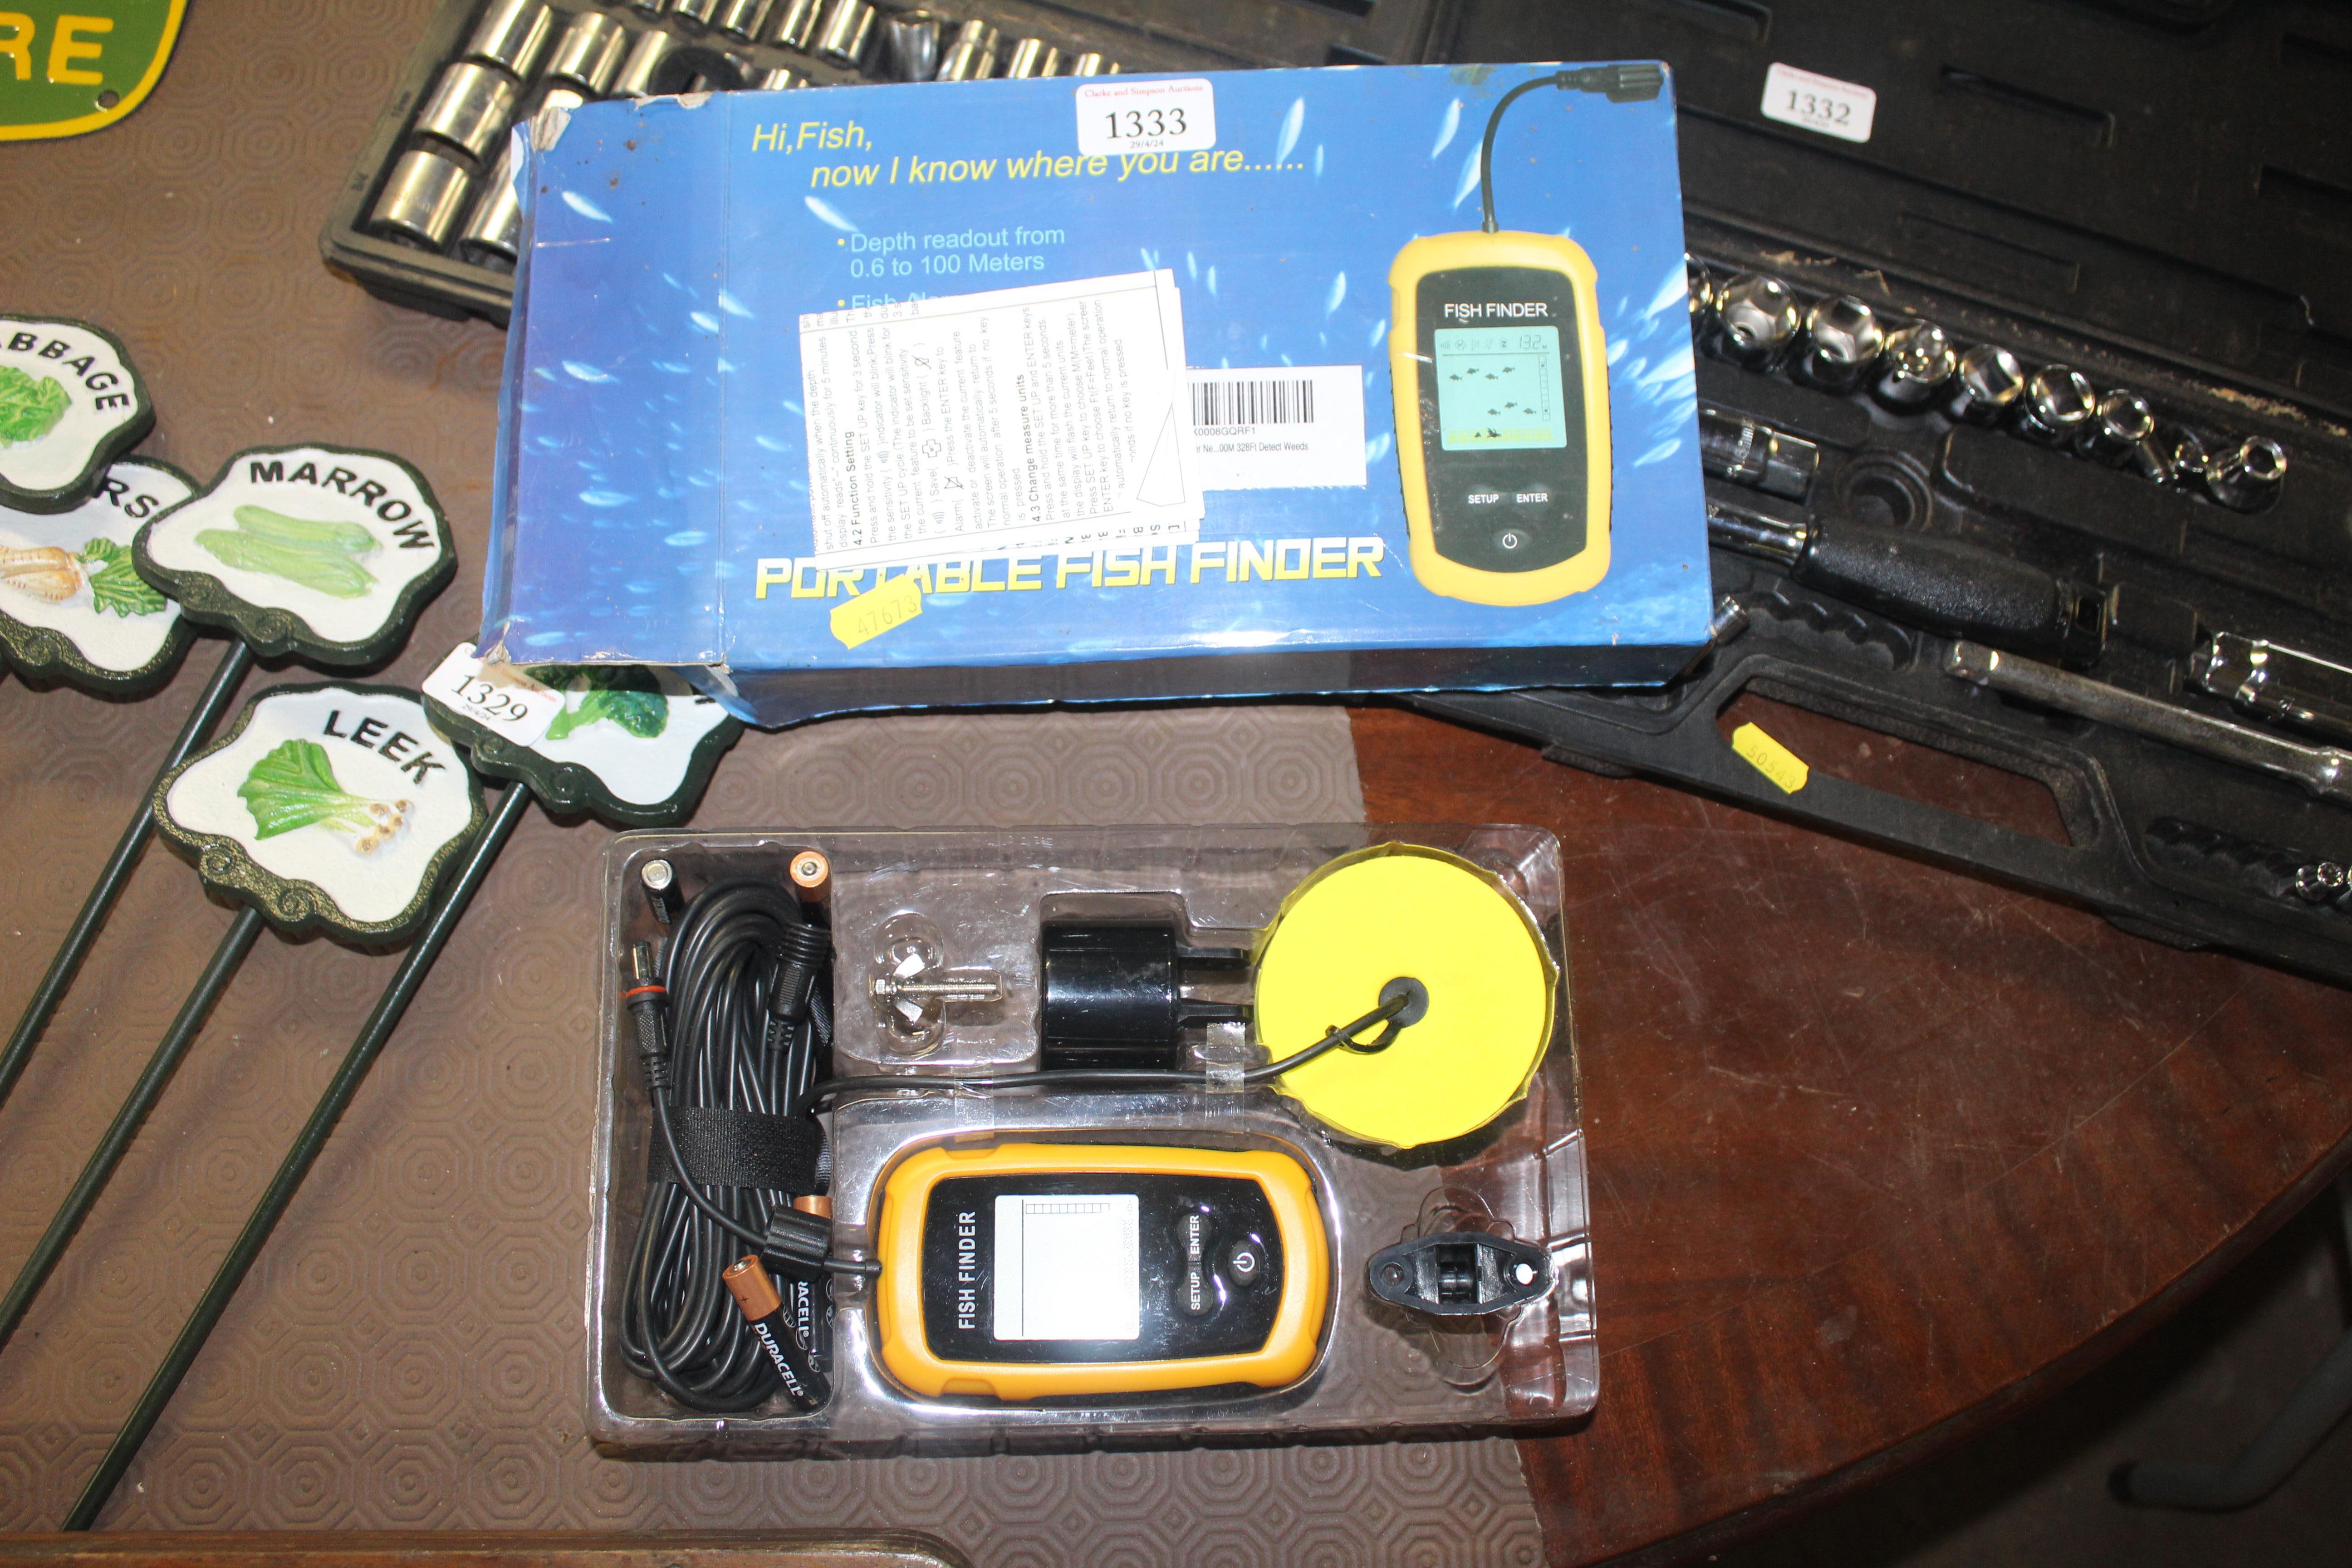 A portable fish finder device with original box